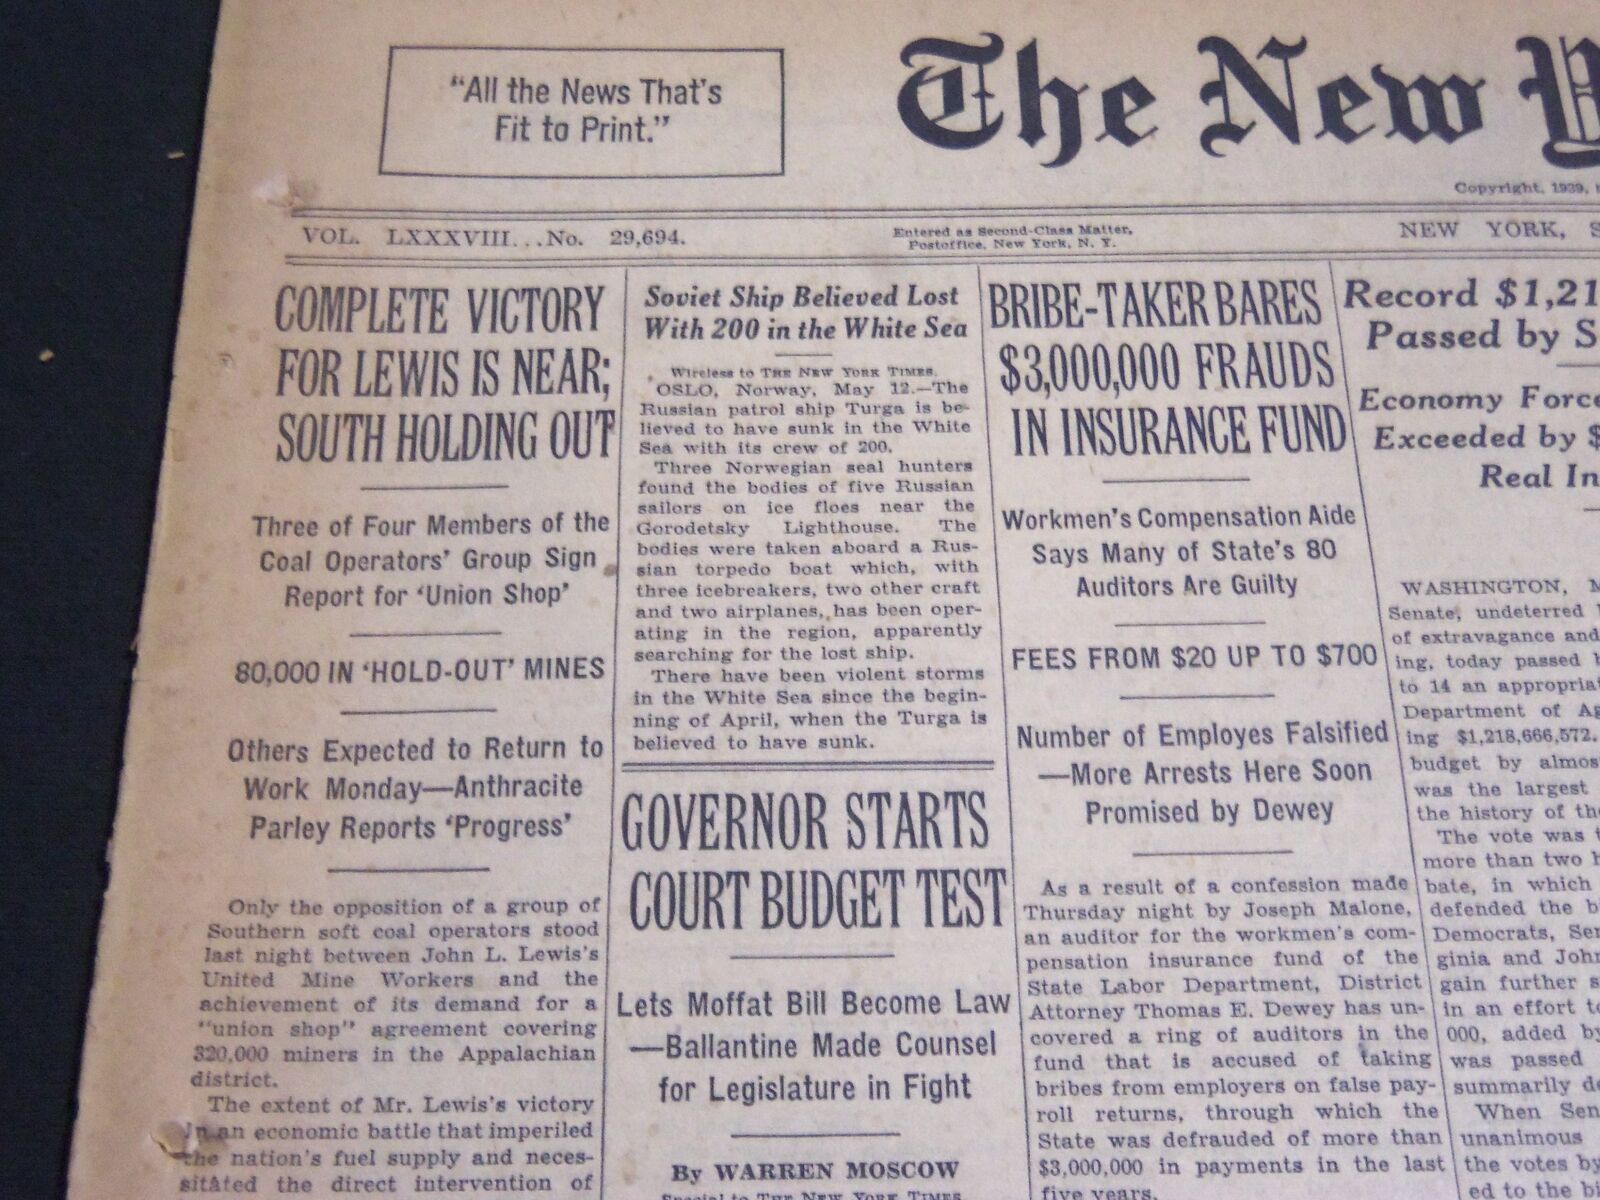 1939 MAY 13 NEW YORK TIMES - COMPLETE VICTORY FOR LEWIS IS NEAR - NT 6850